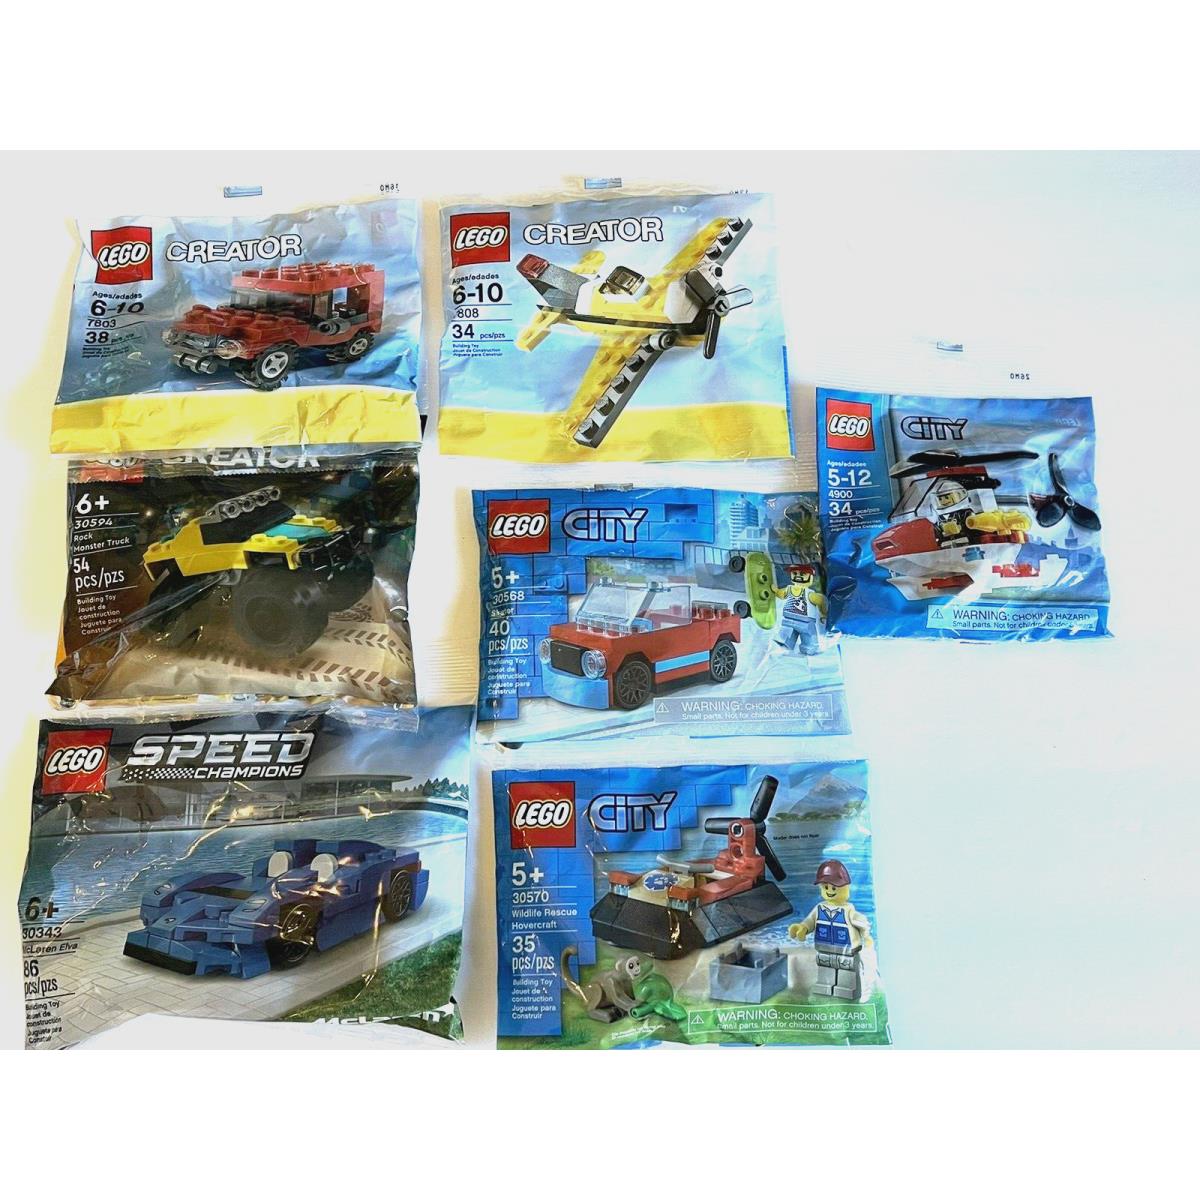 Lego City Creator Speed Huge Lots of Vehicles Polybags Helicopter Plane Cars